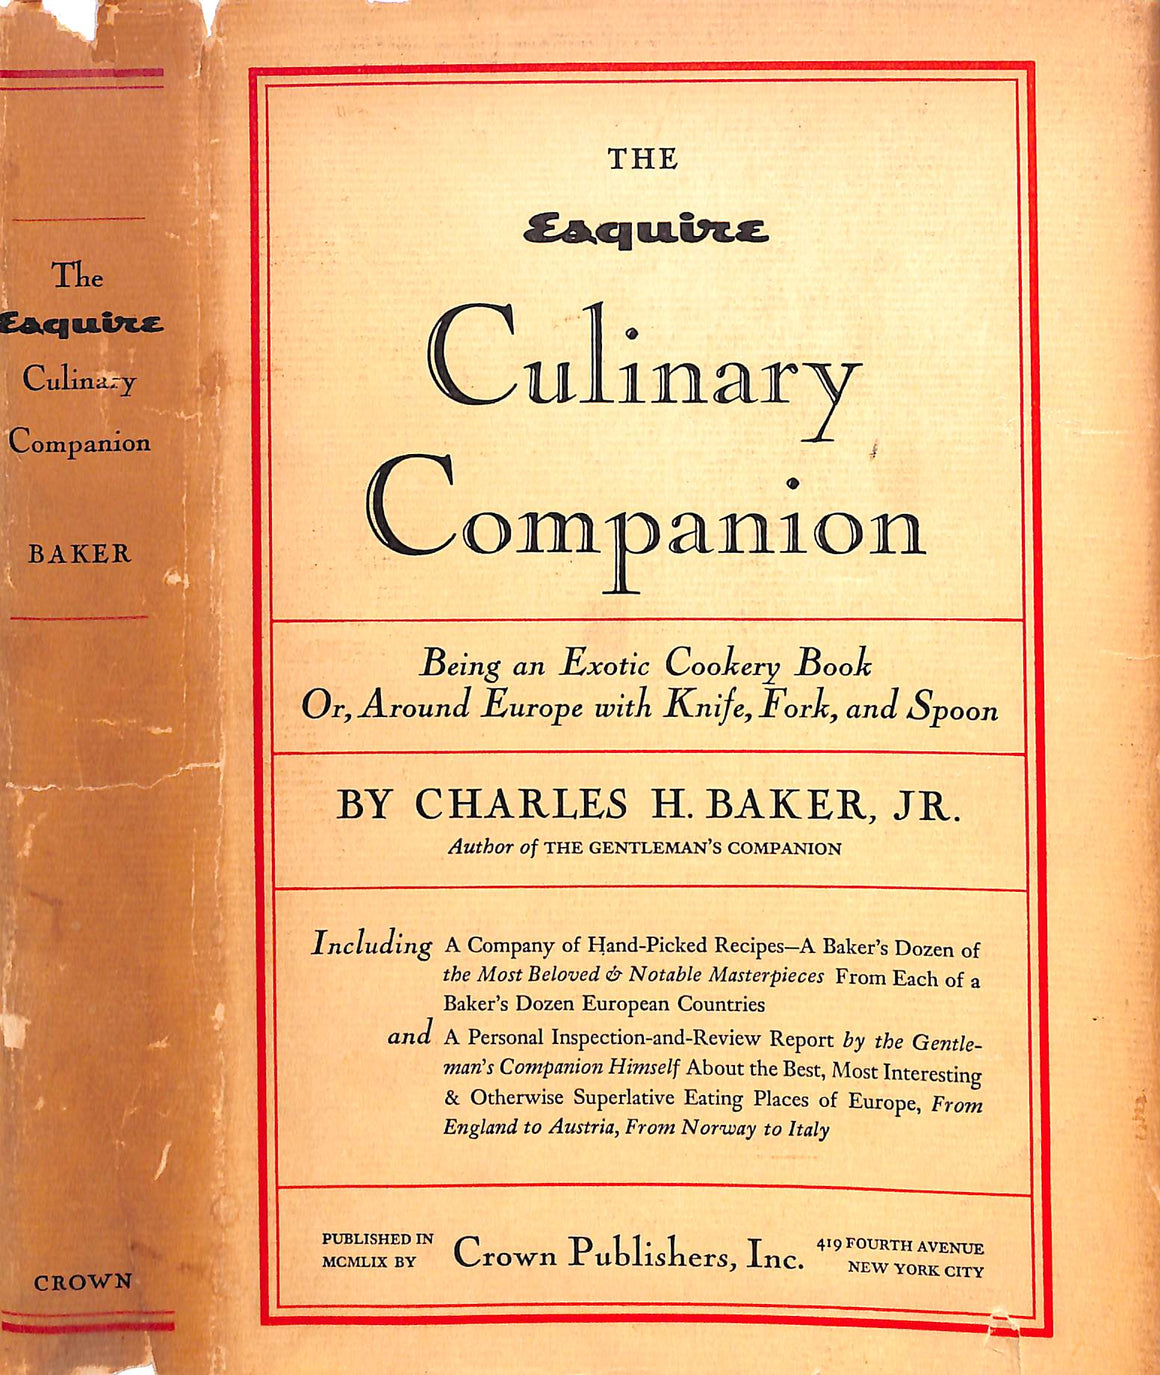 "The Esquire: Culinary Companion: Being An Exotic Cookery Book" 1960 BAKER, Charles H. Jr.